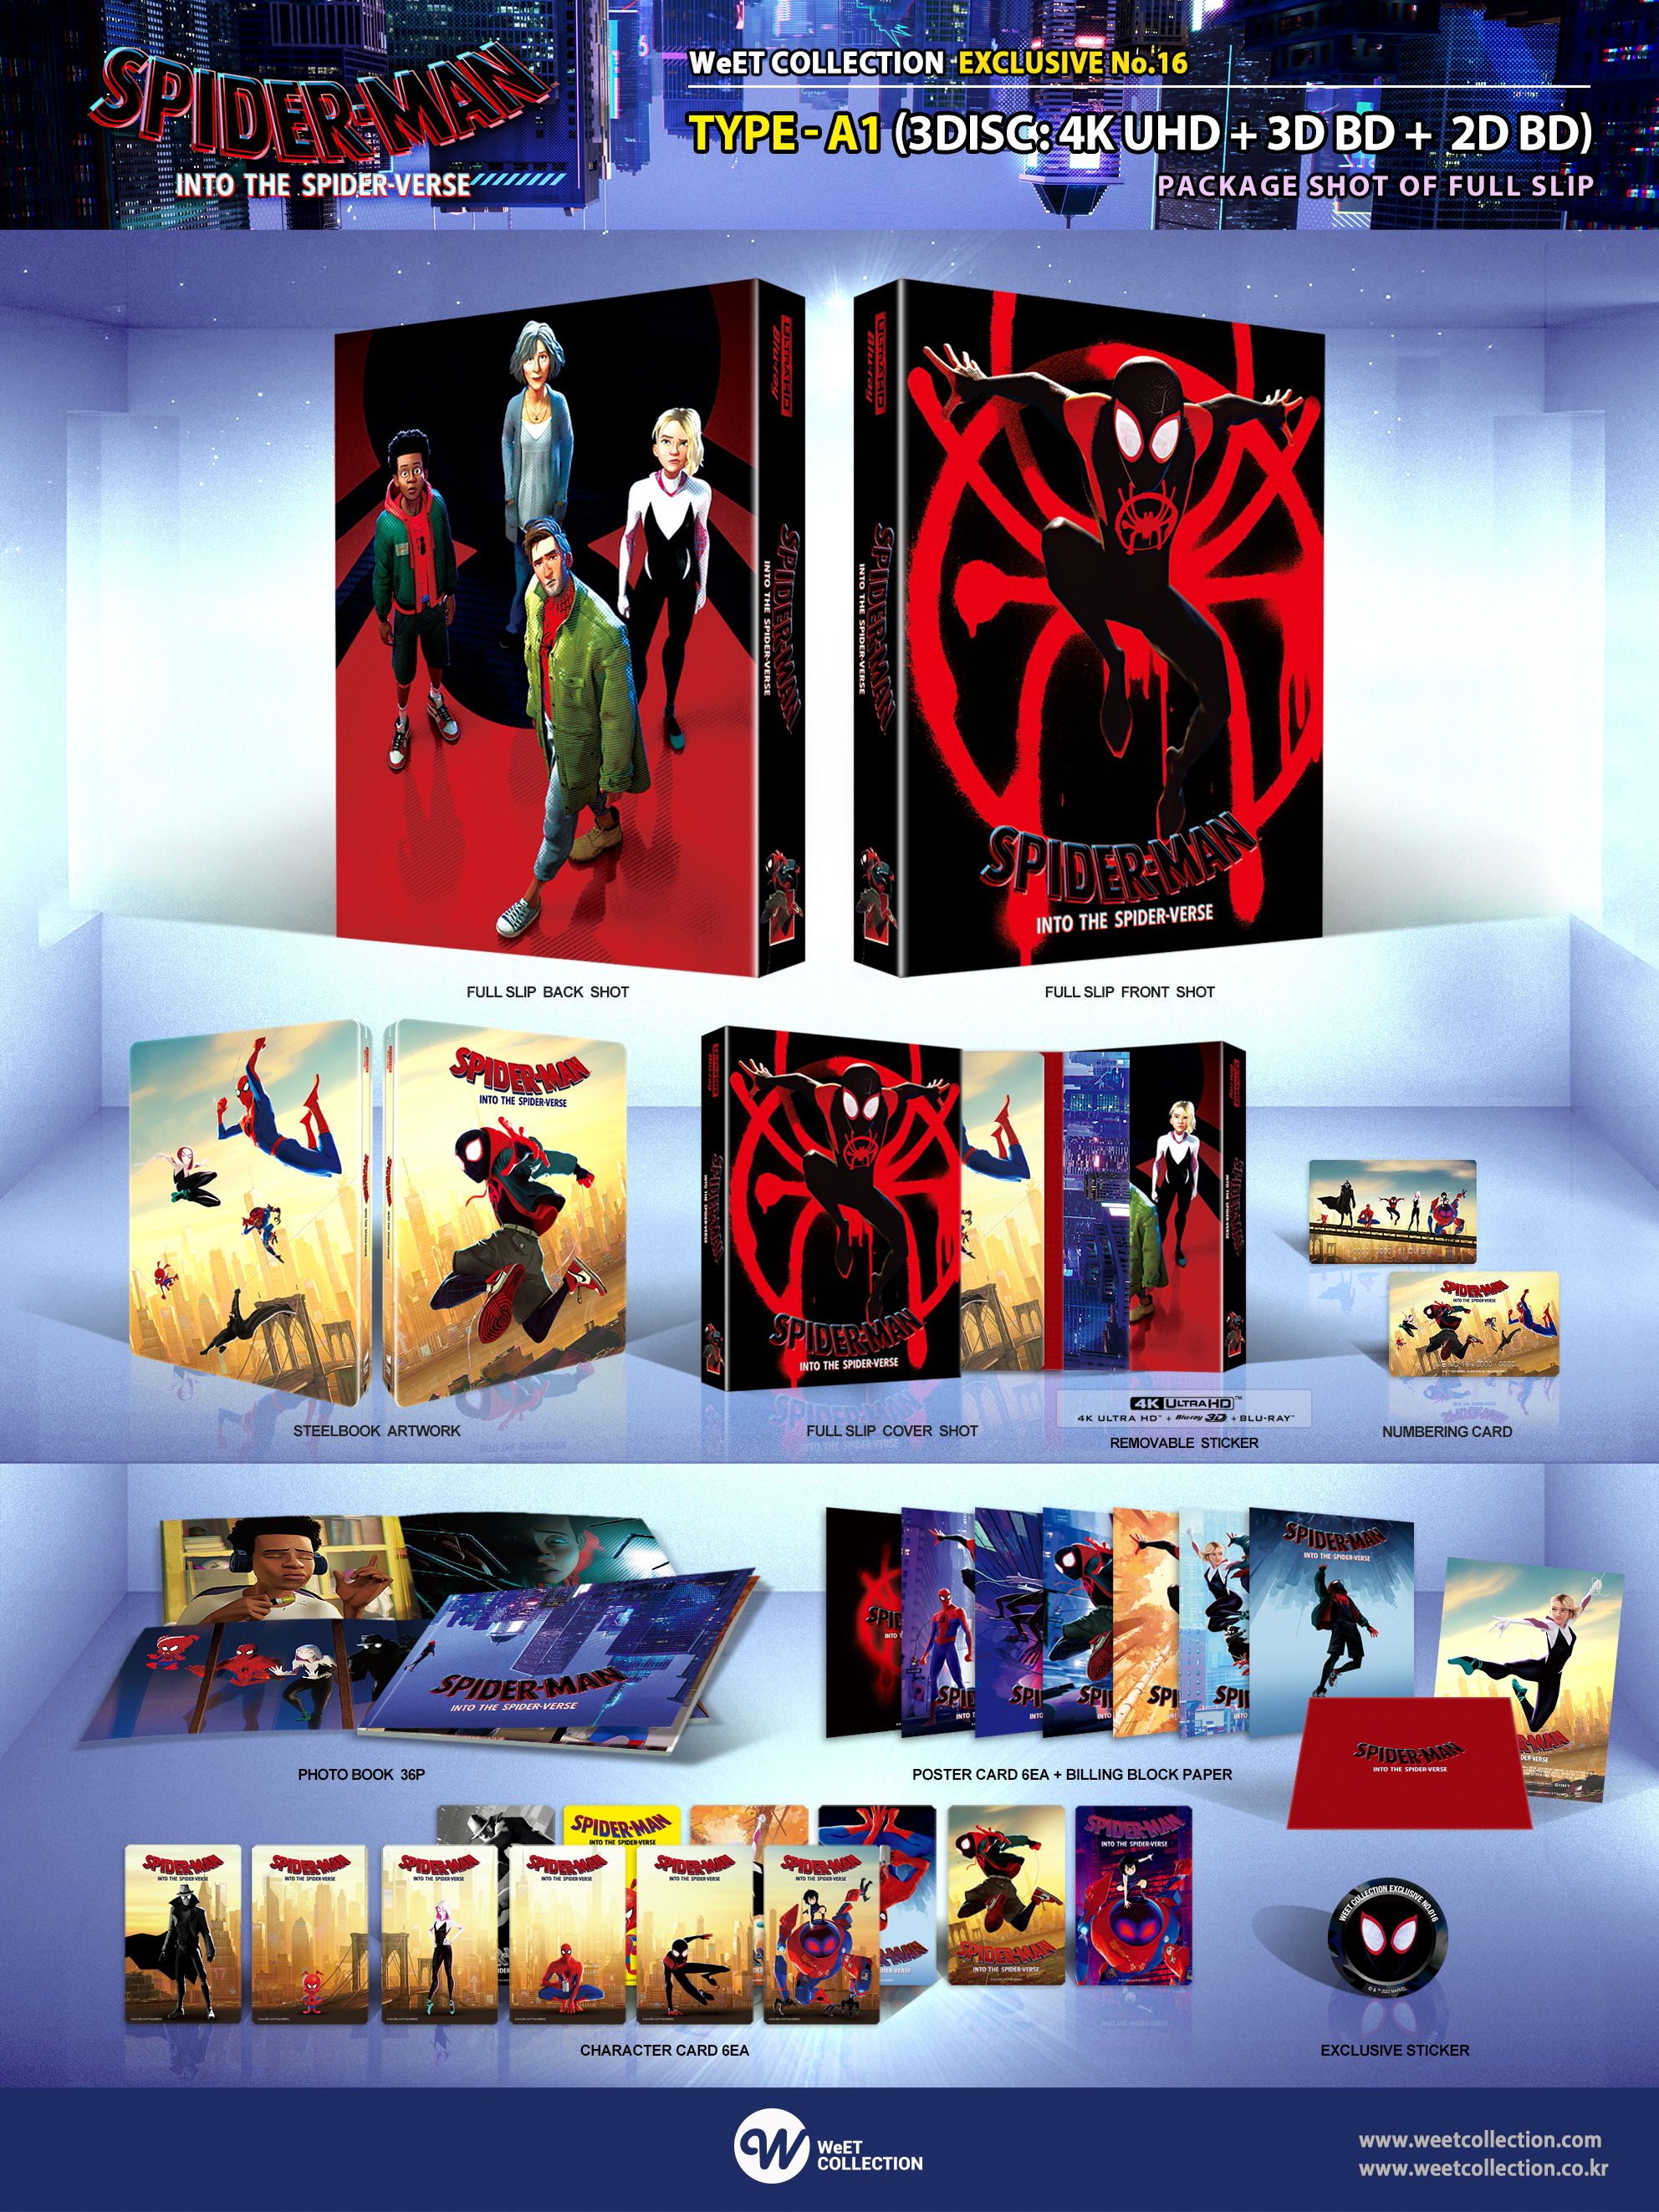 Spider-Man: Into the Spider-Verse (4K Ultra HD + Blu-Ray + ) 